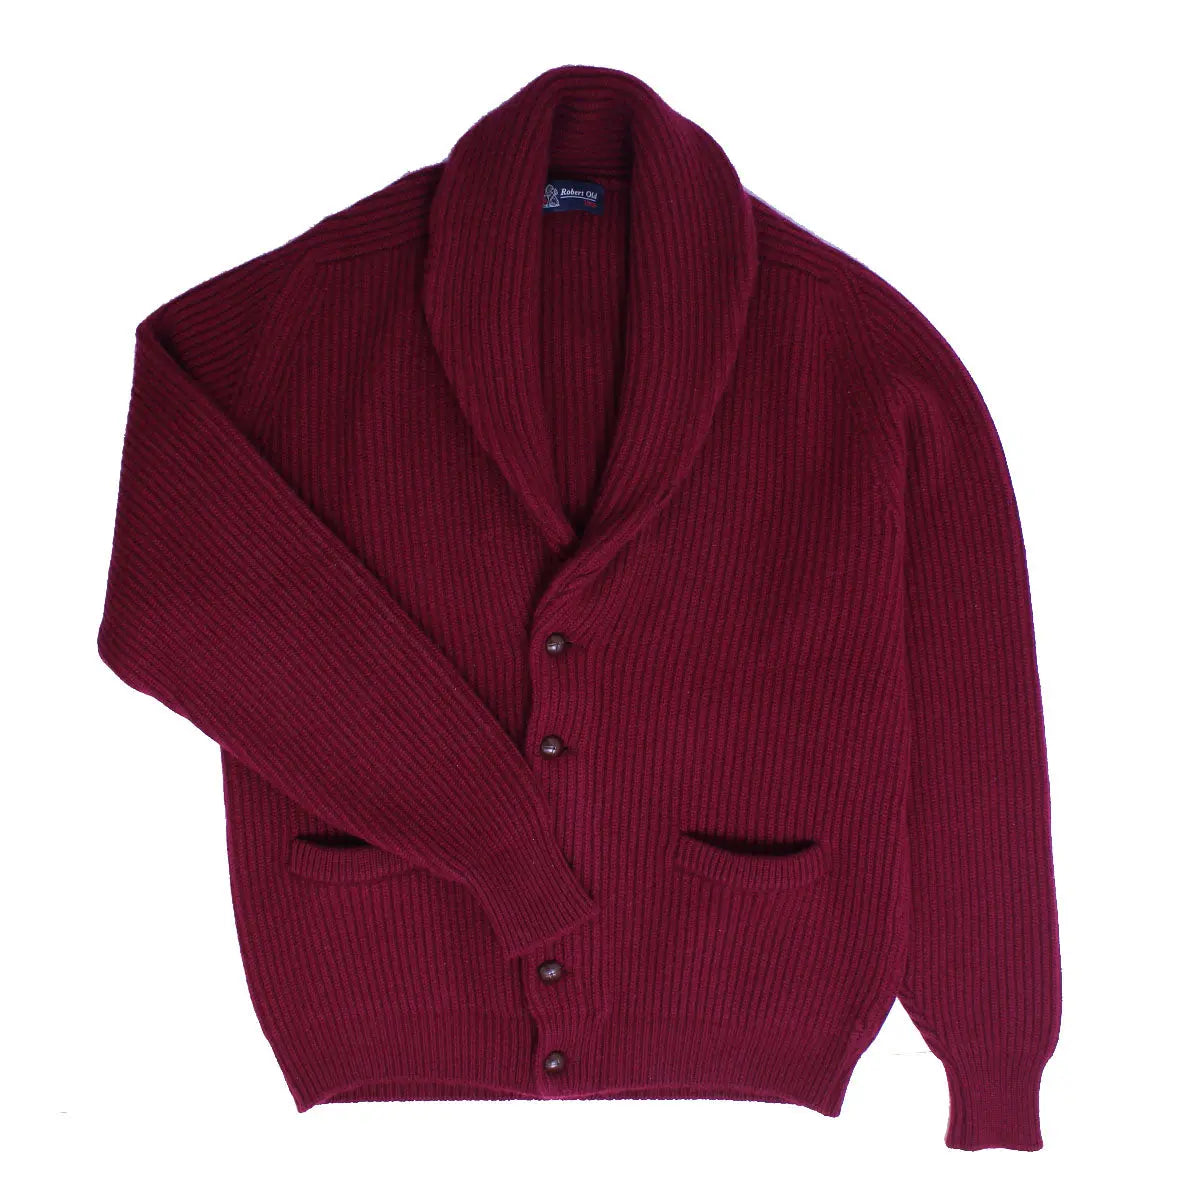 Claret Red Colonial 8ply Cashmere Shawl Cardigan  Robert Old   